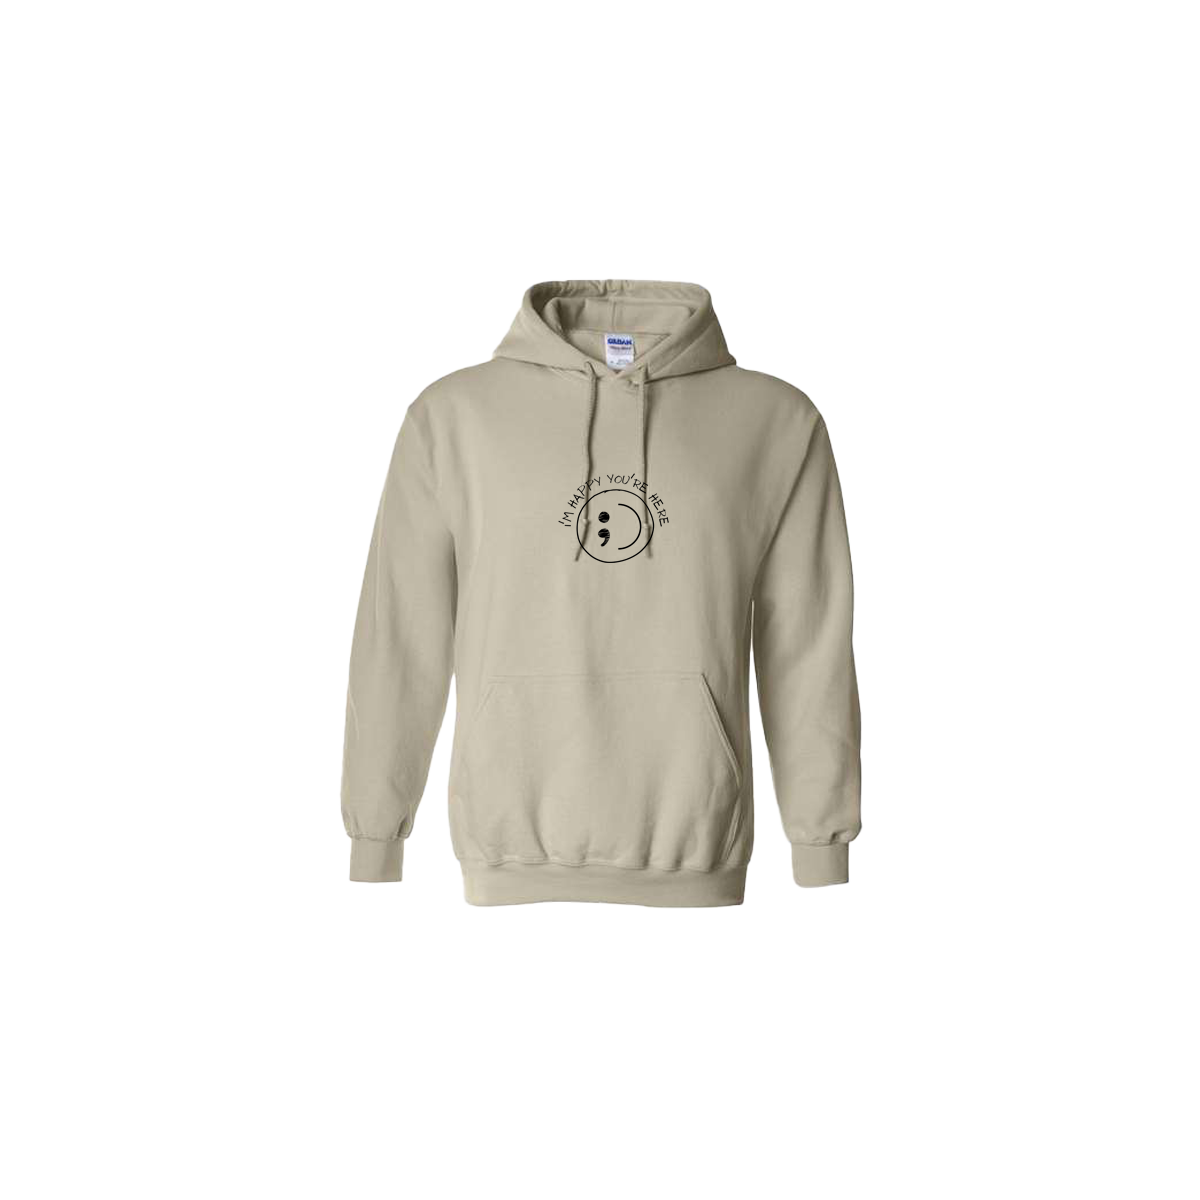 I'm Happy You're Here Embroidered Beige Hoodie - Mental Health Awareness Clothing